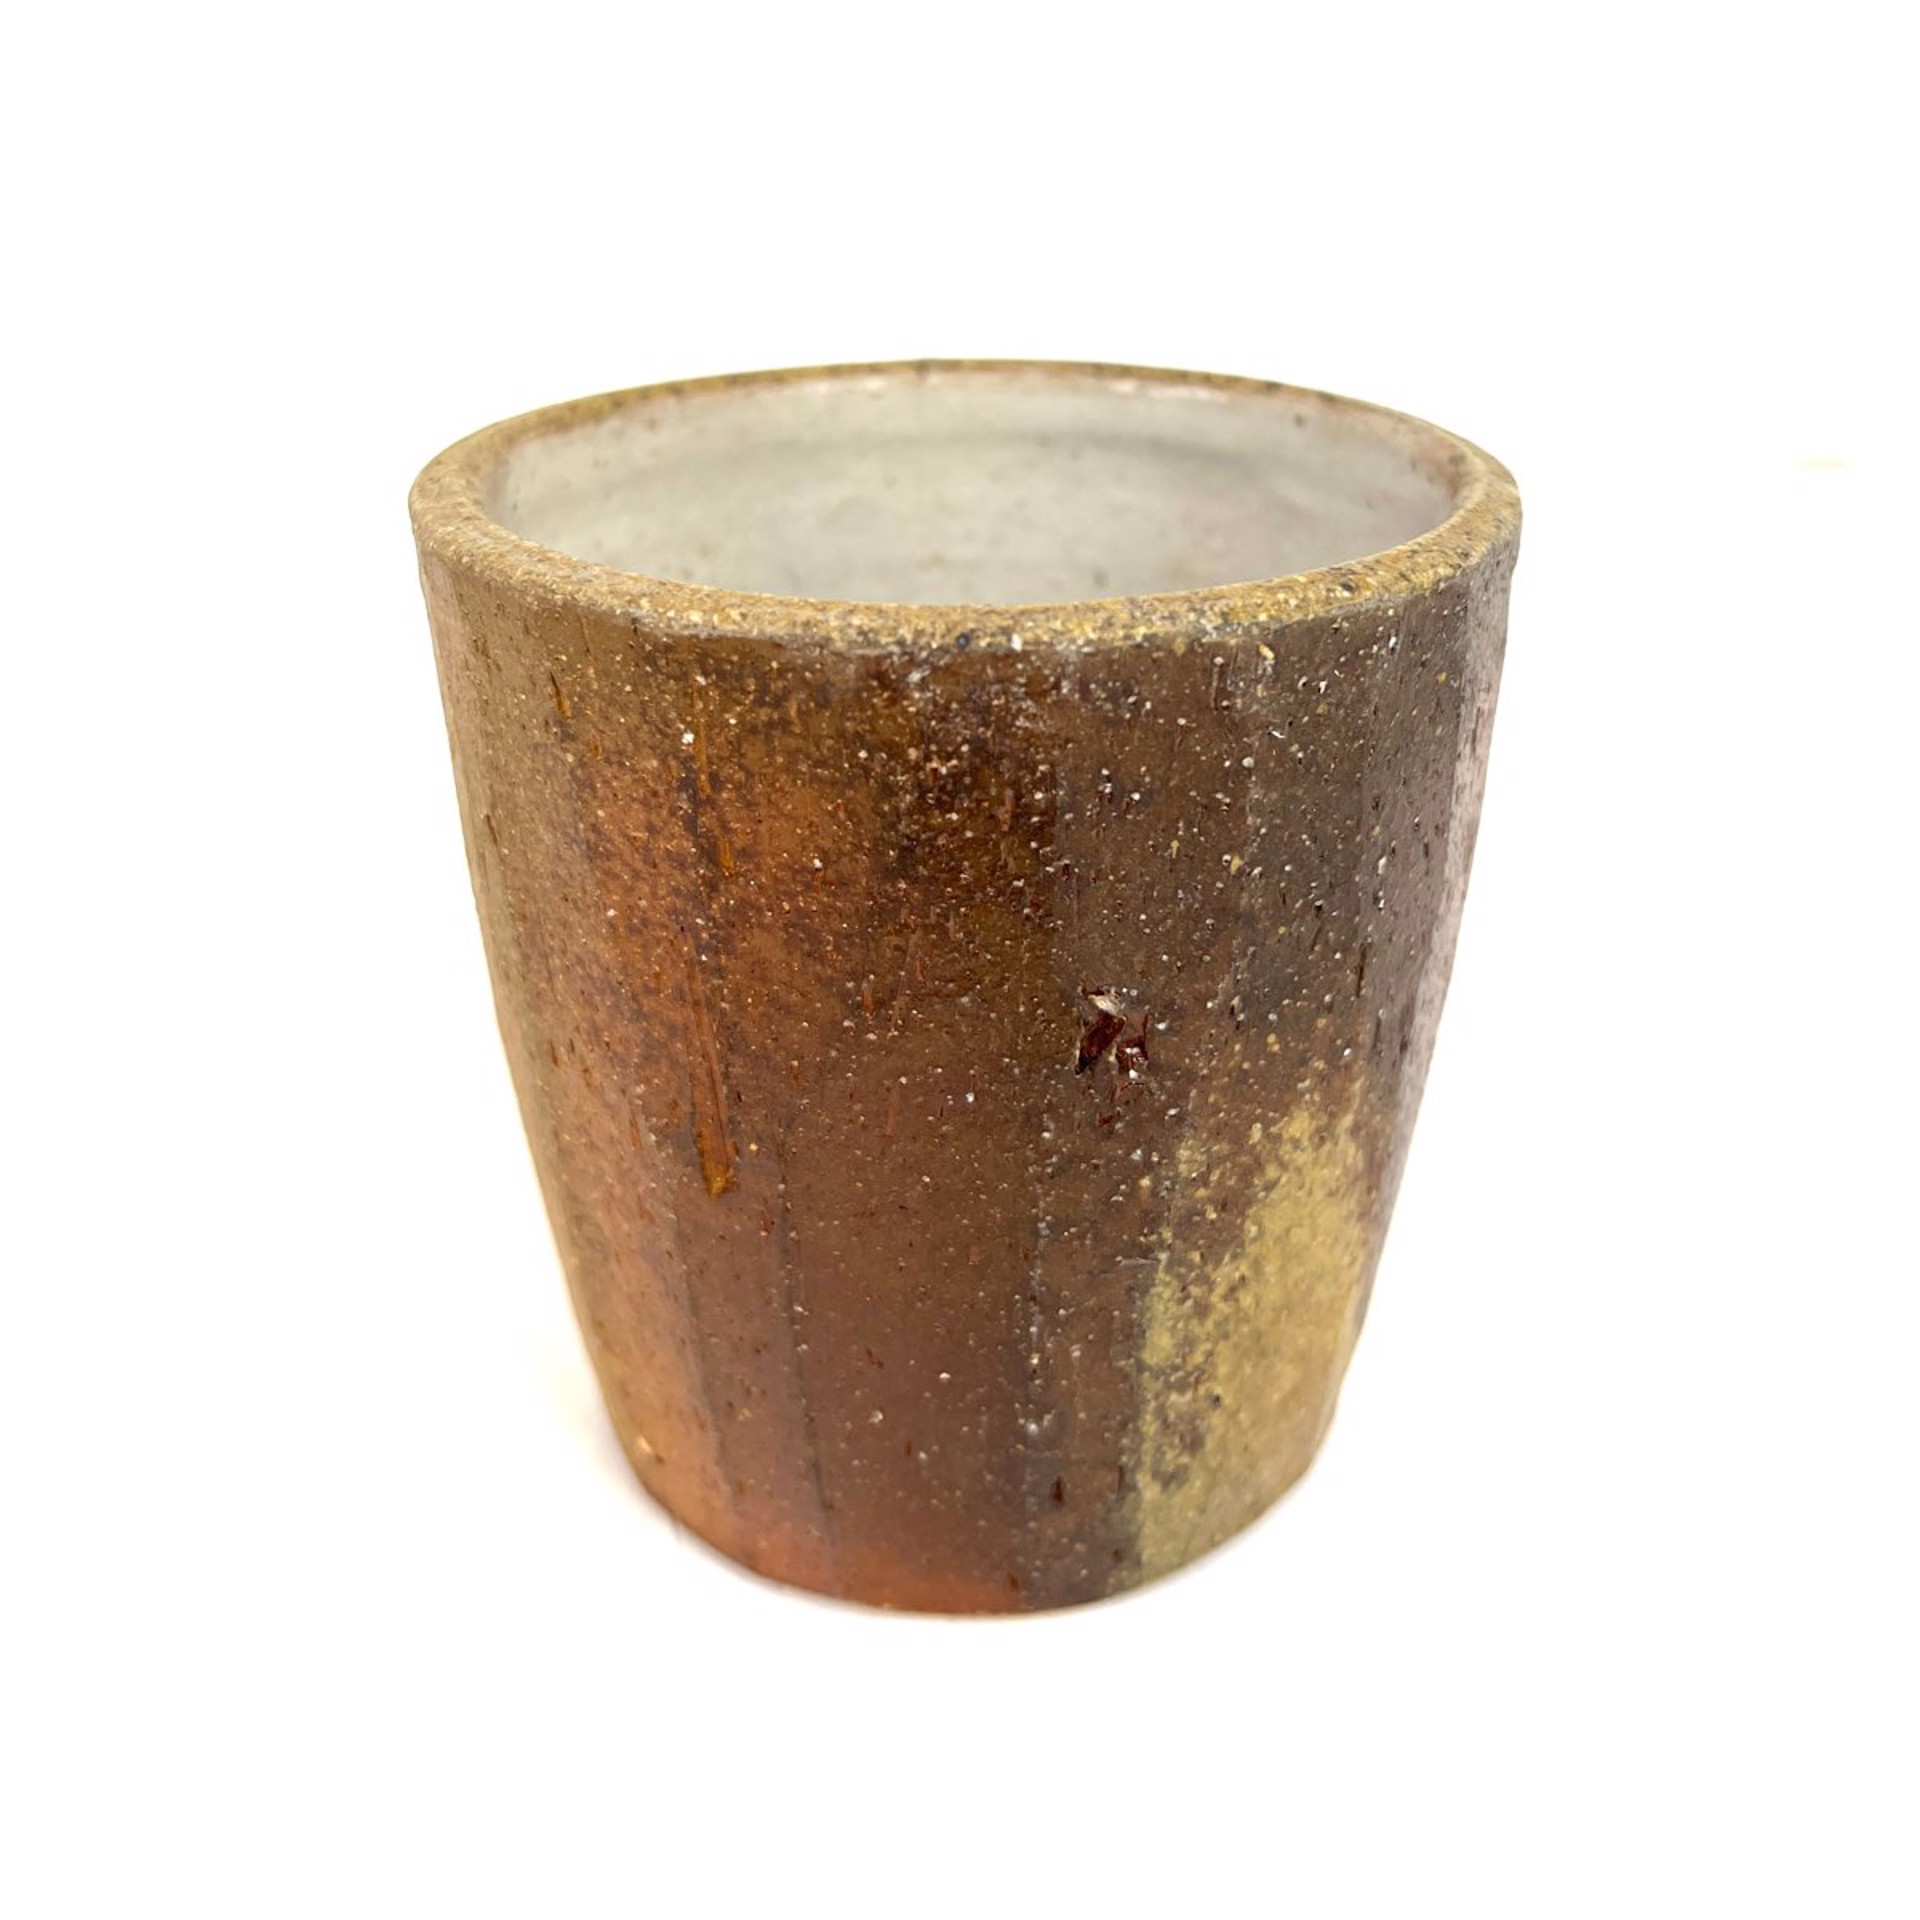 Wood-Fired Tumbler by Mitch Yung